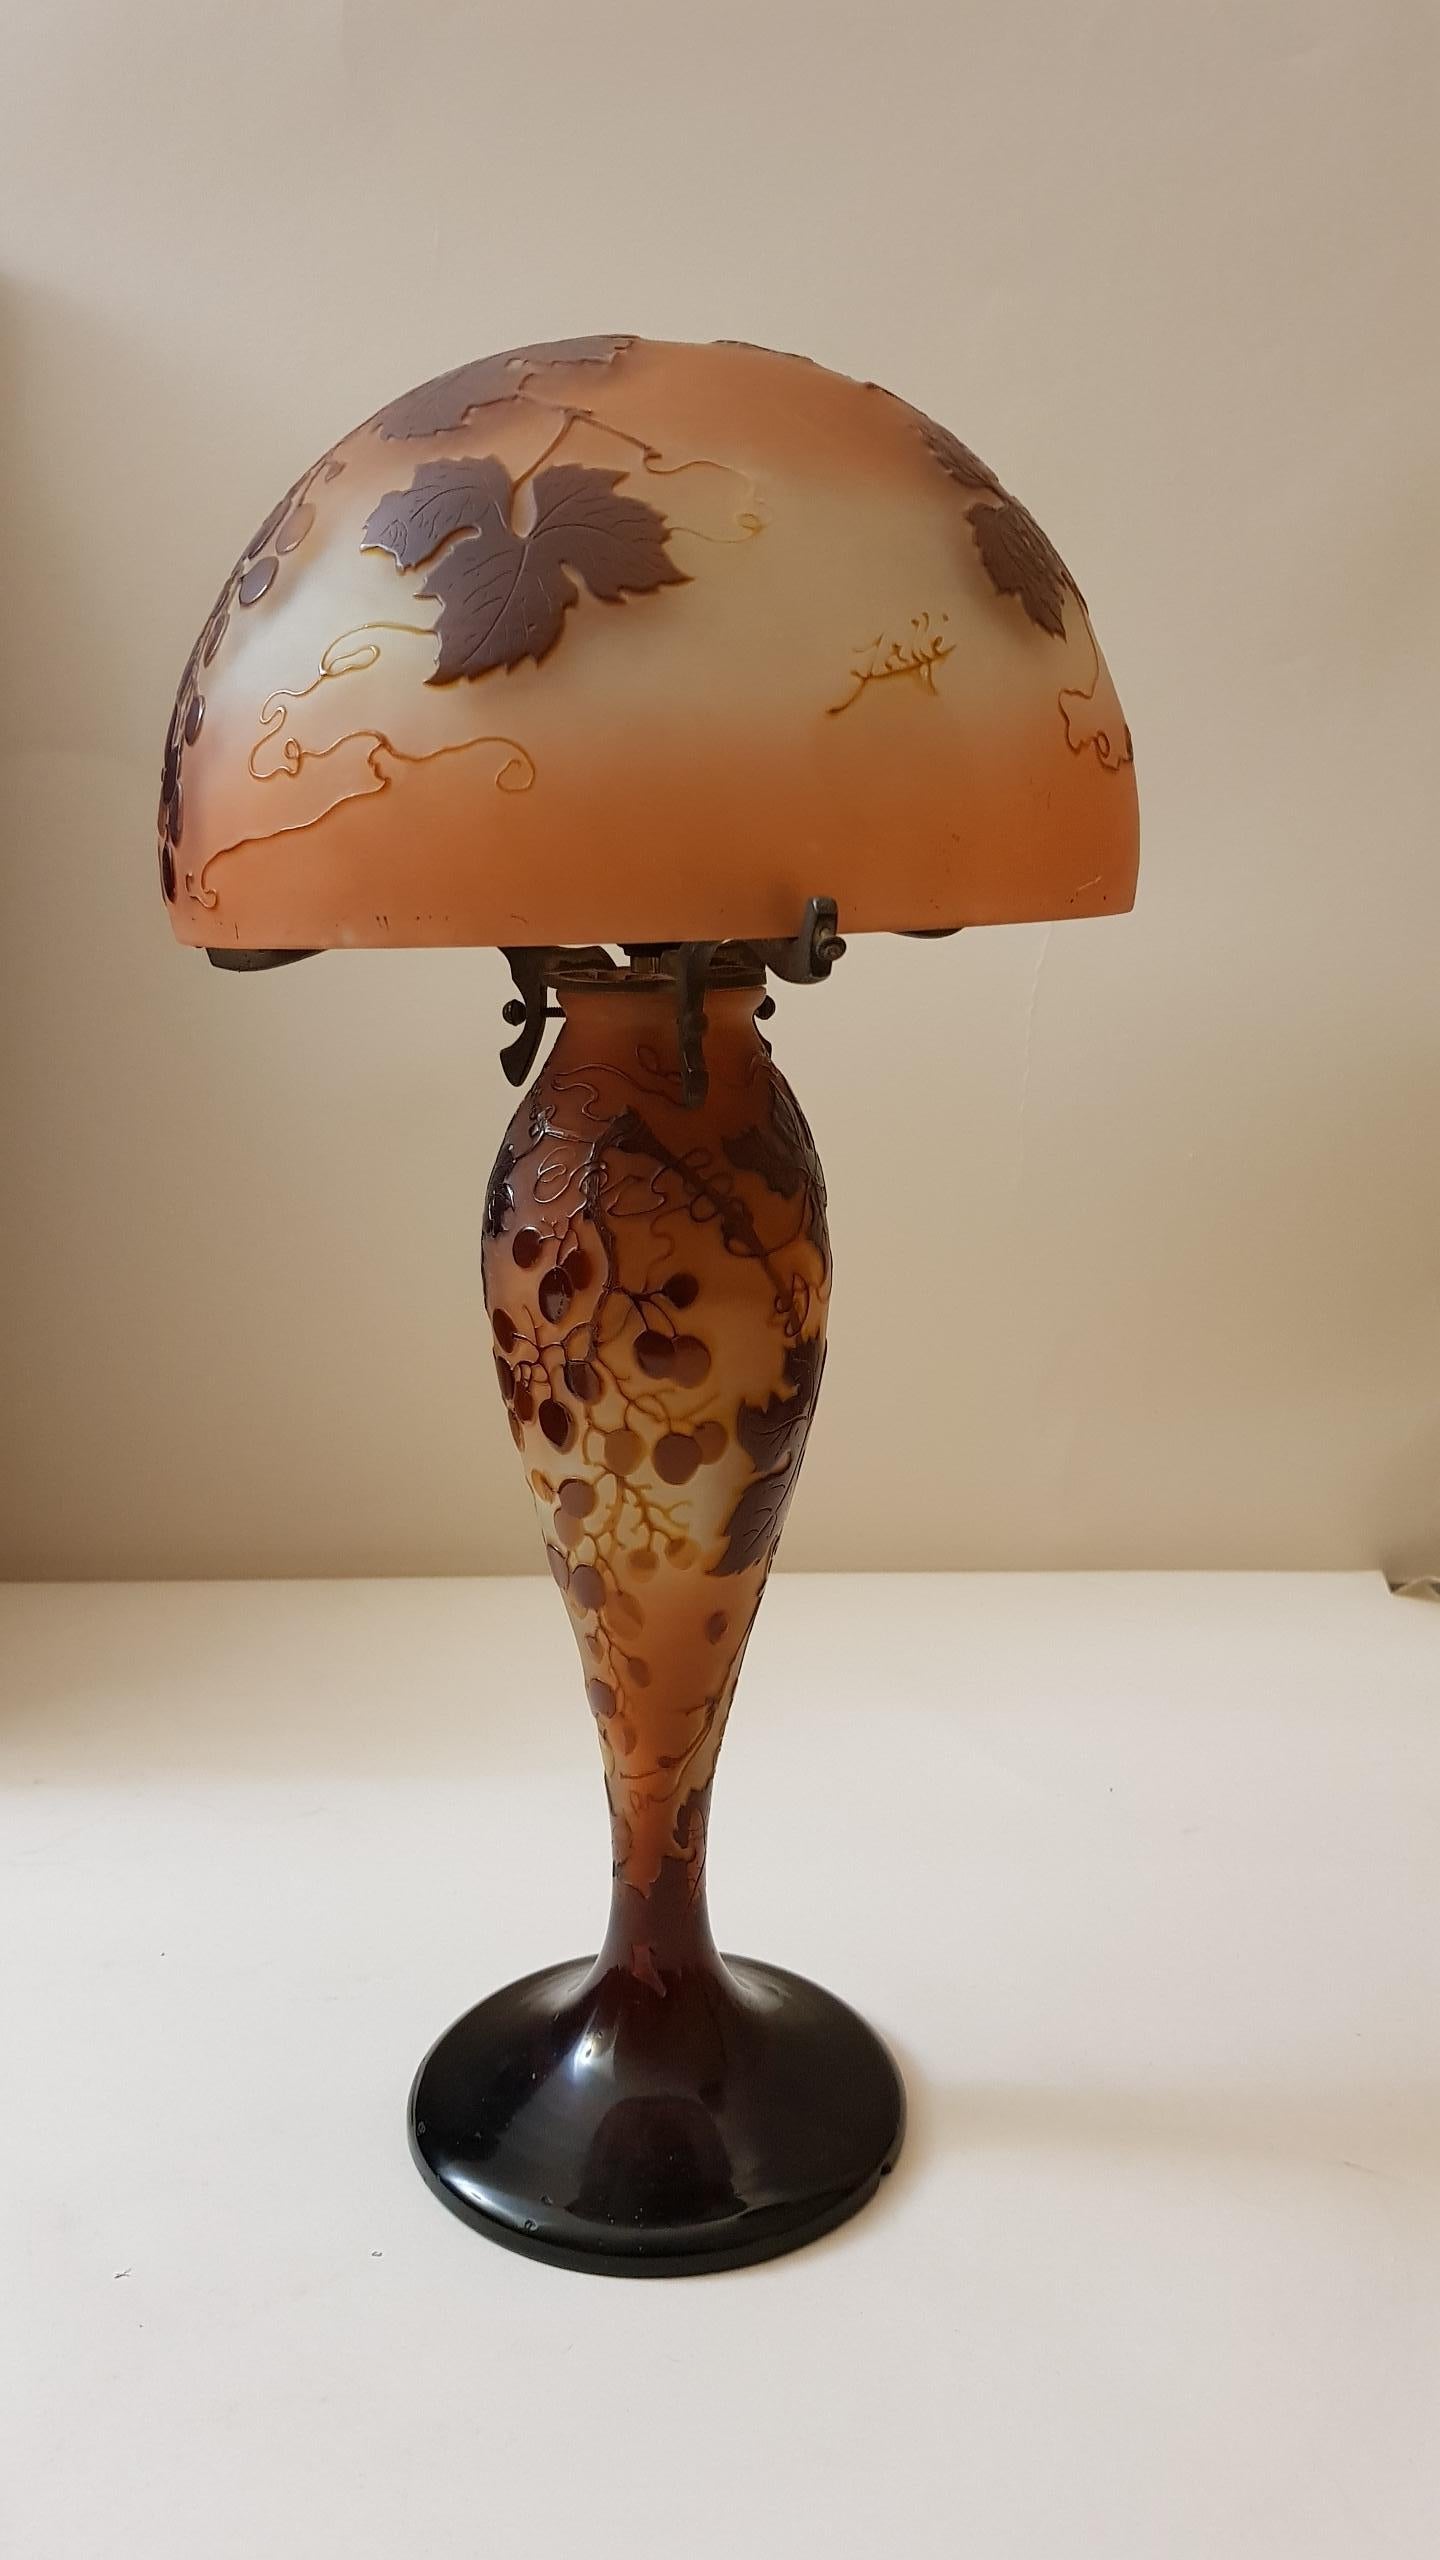 LAMP WITH PAMPRES OF VINE in multilayer glass with shaped hat
mushroom, baluster shaped foot and gilded bronze mount with three branches.
Decorated with acid vines of vines in brown on a background of shades of purple.
Signed cameo on the foot and